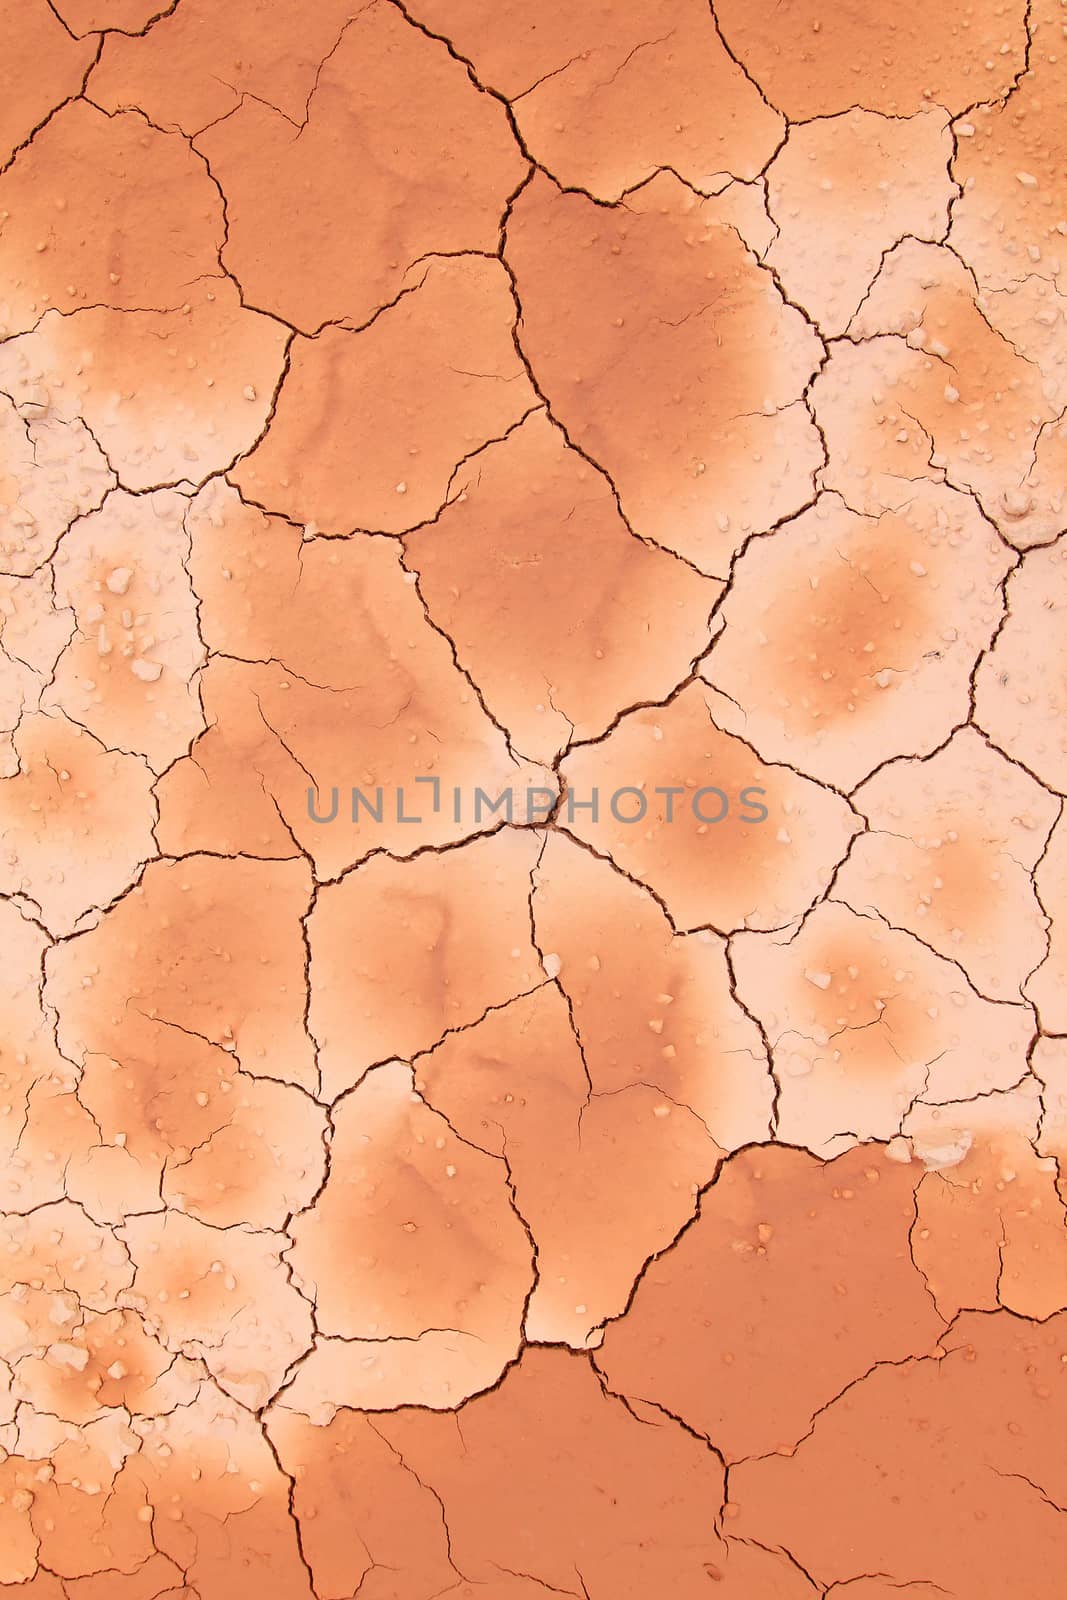 Background of drought